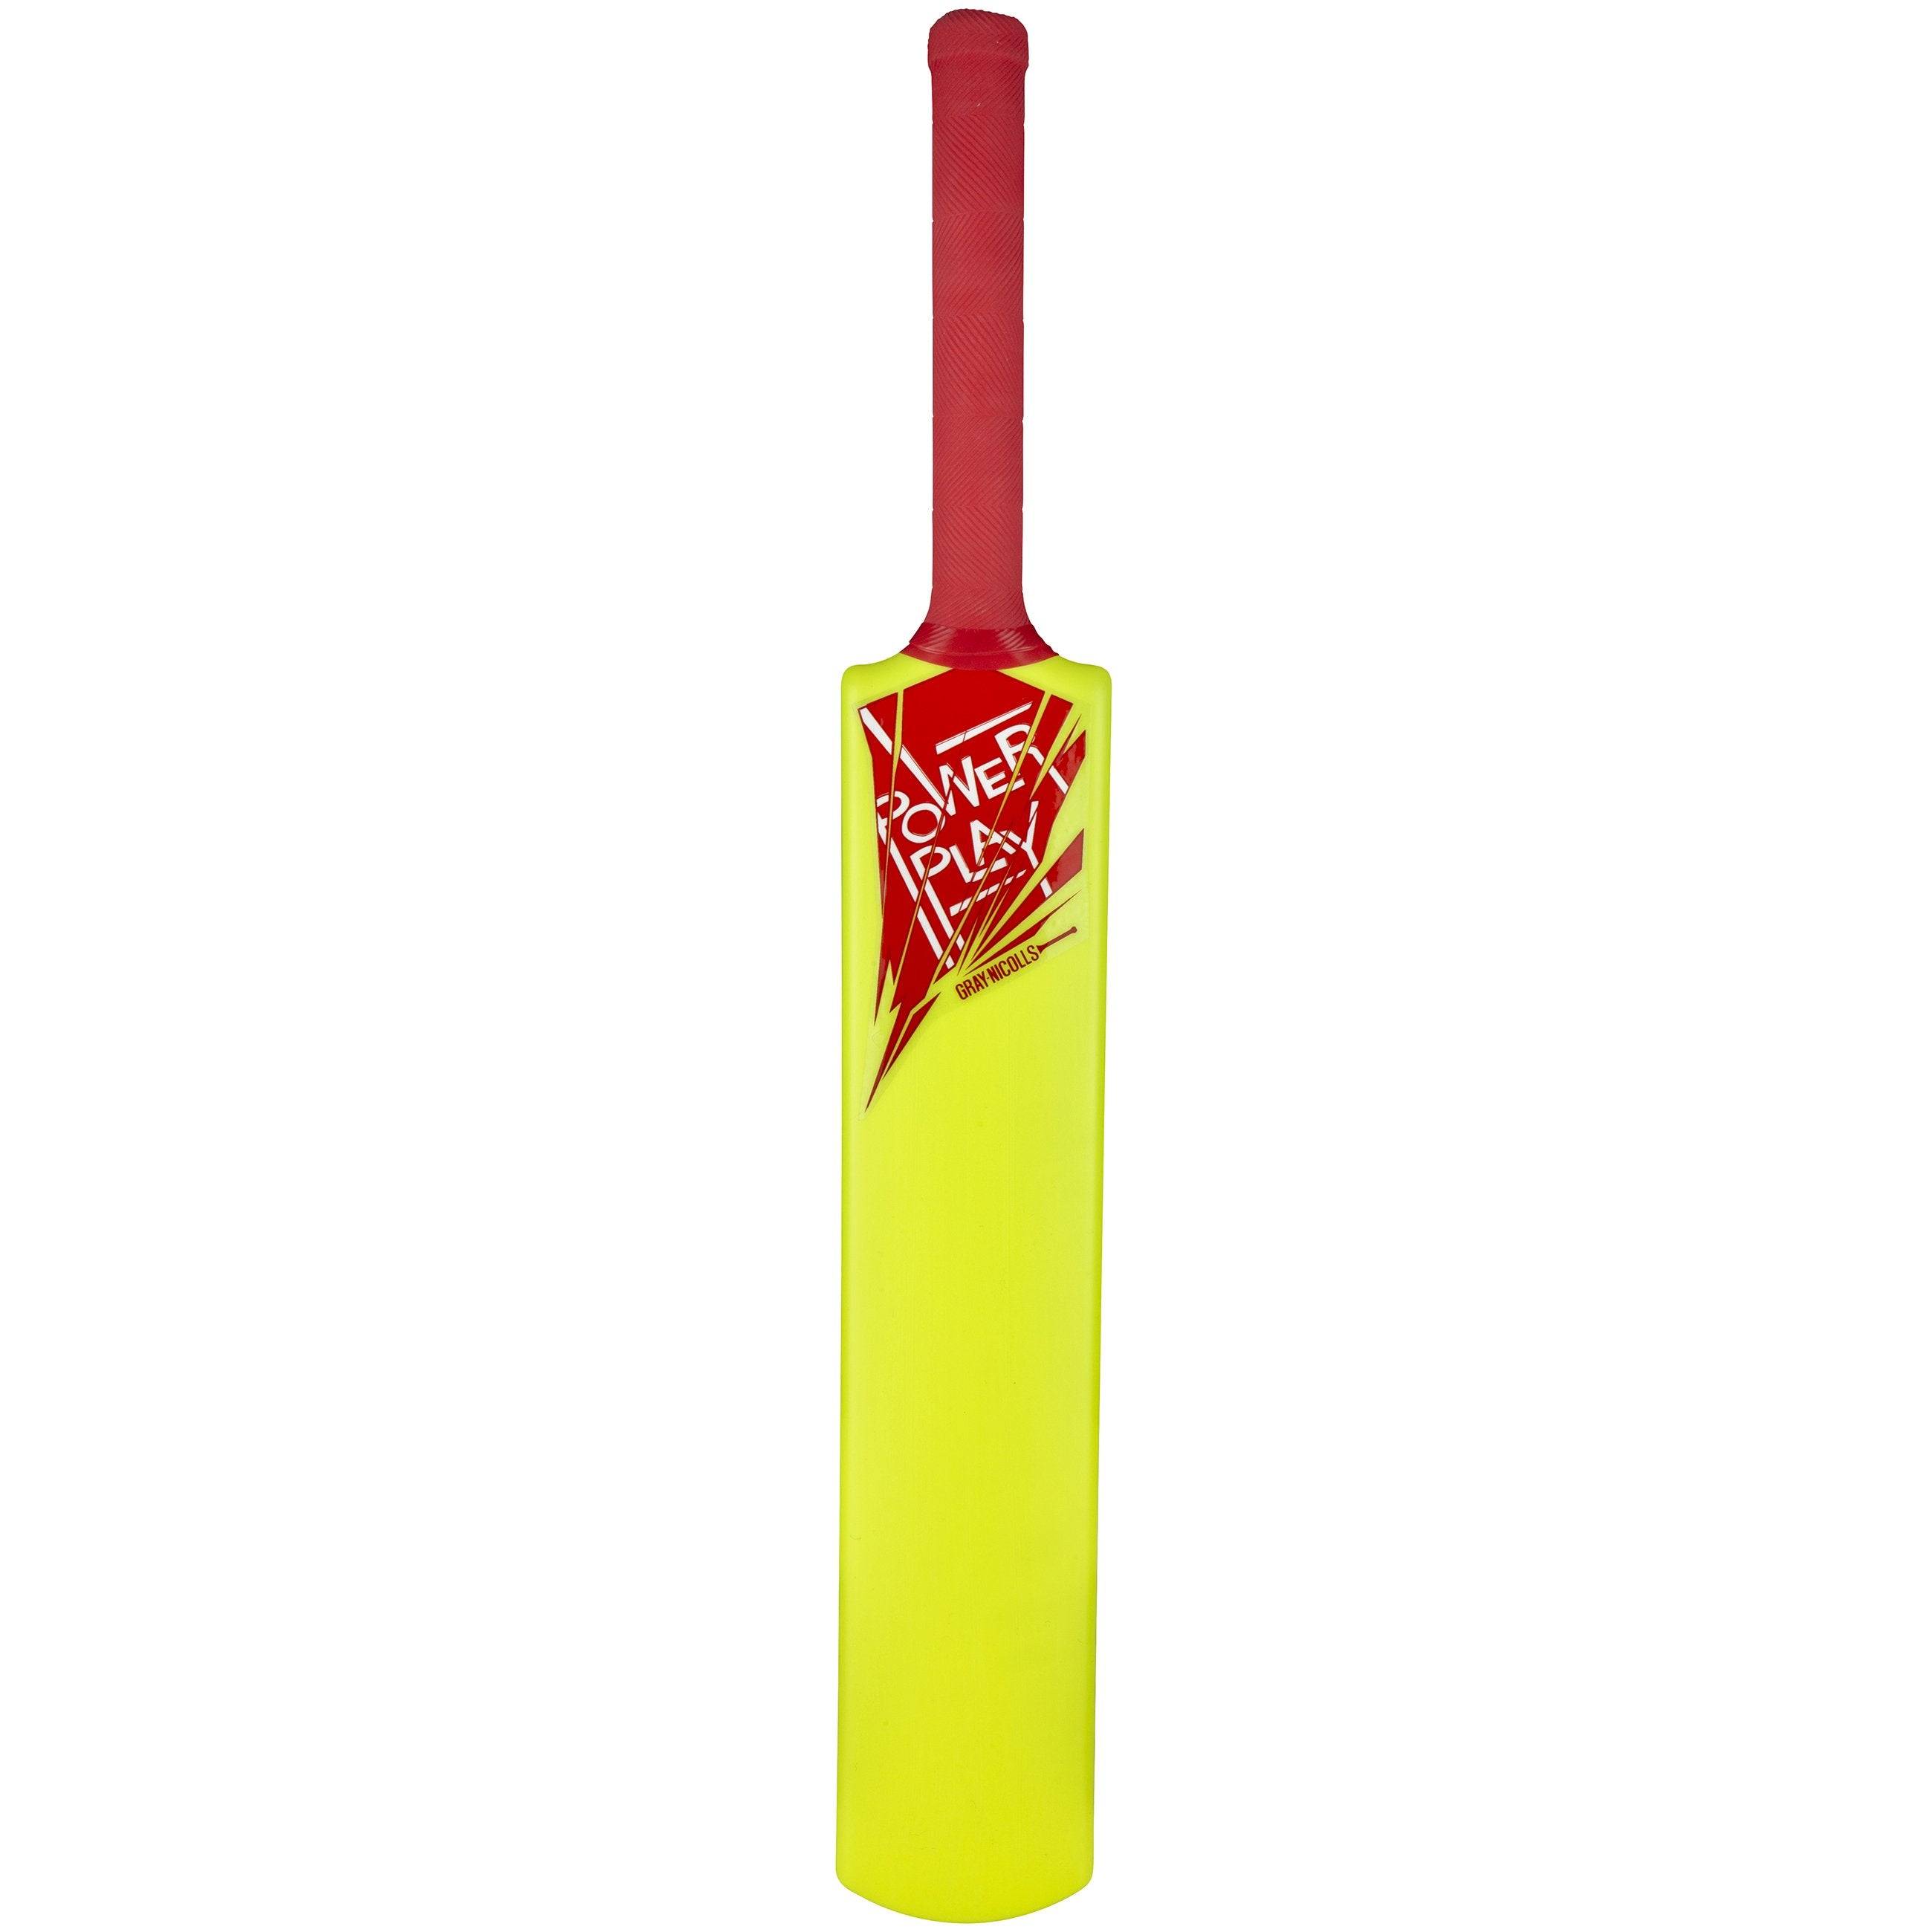 2600 CNBA20 5802552 Plastic Power Play Bat Yellow Size 4 Front